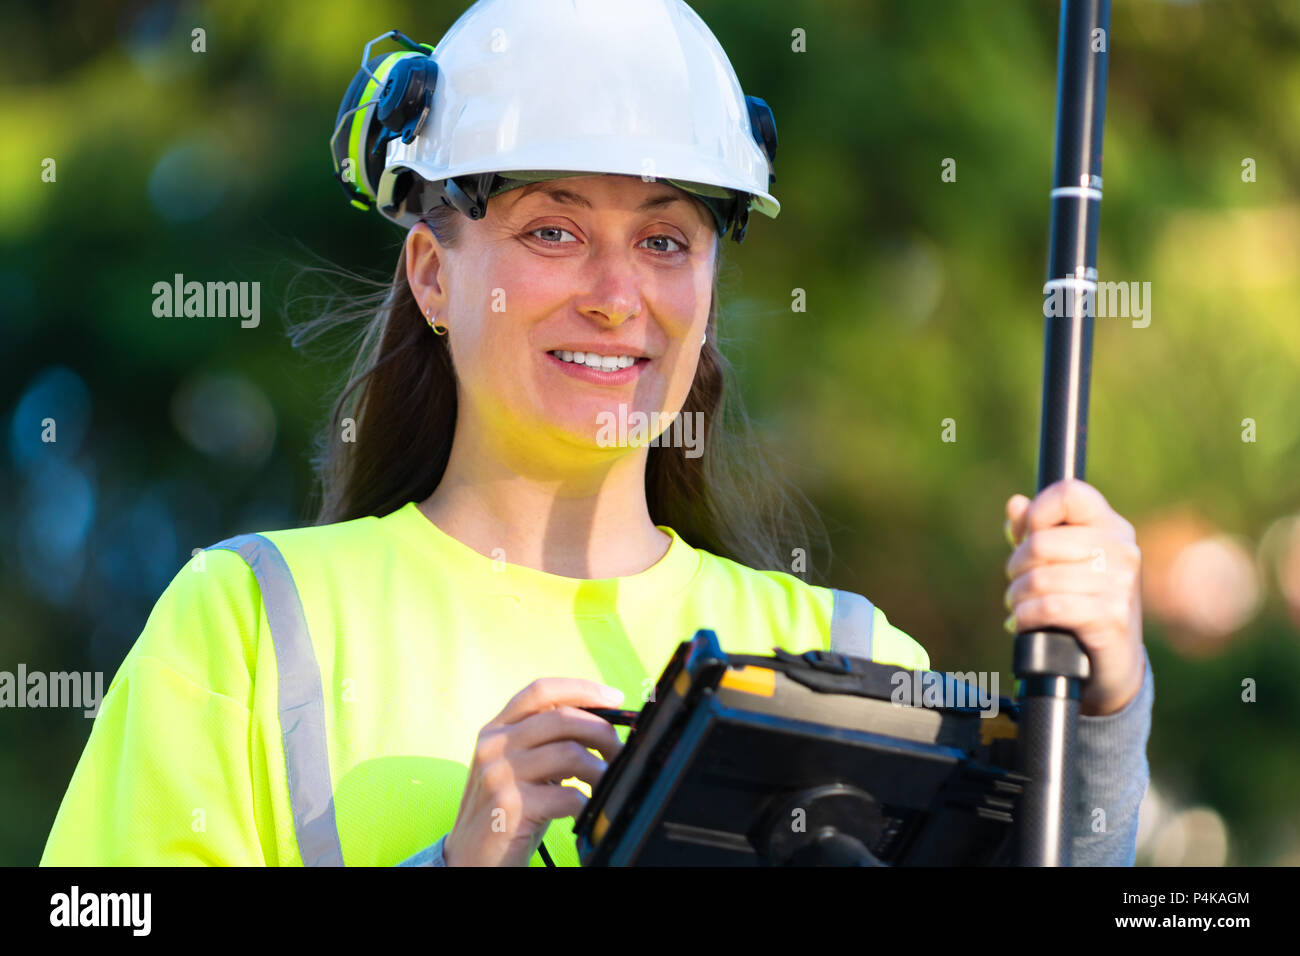 Woman in reflective clothing smiling while using GPS land surveying tool with screen Stock Photo